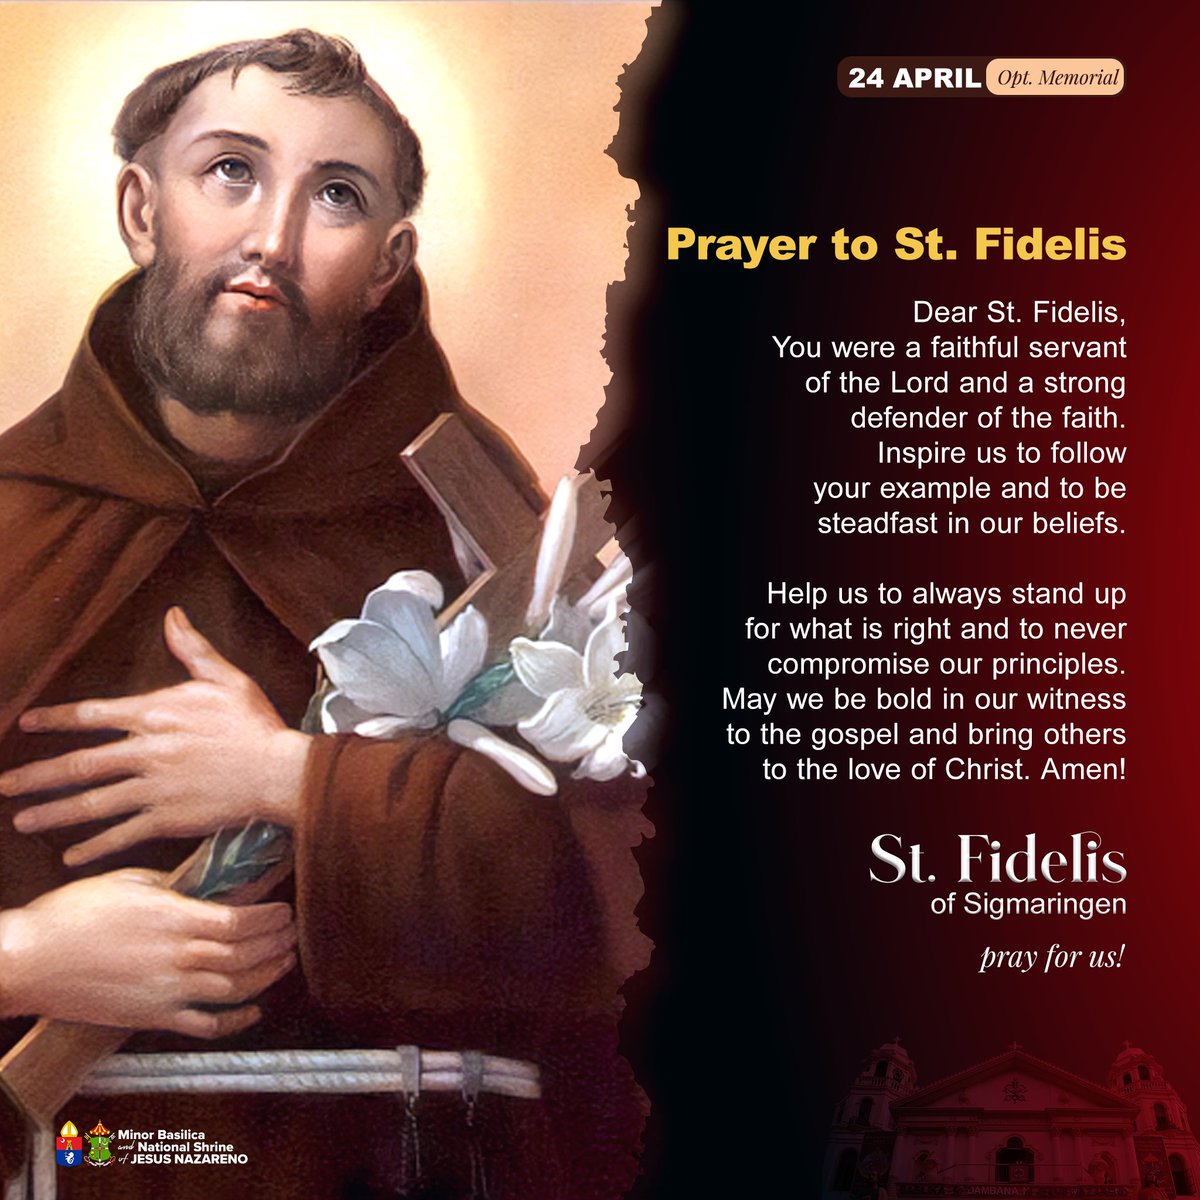 Saint Fidelis of Sigmaringen
24 April; Optional Memorial

[Let us pray] O God, who were pleased to award the palm of martyrdom to Saint Fidelis as, burning with love for you, he propagated the faith, grant, we pray, through his intercession, that, grounded in charity,

1/3